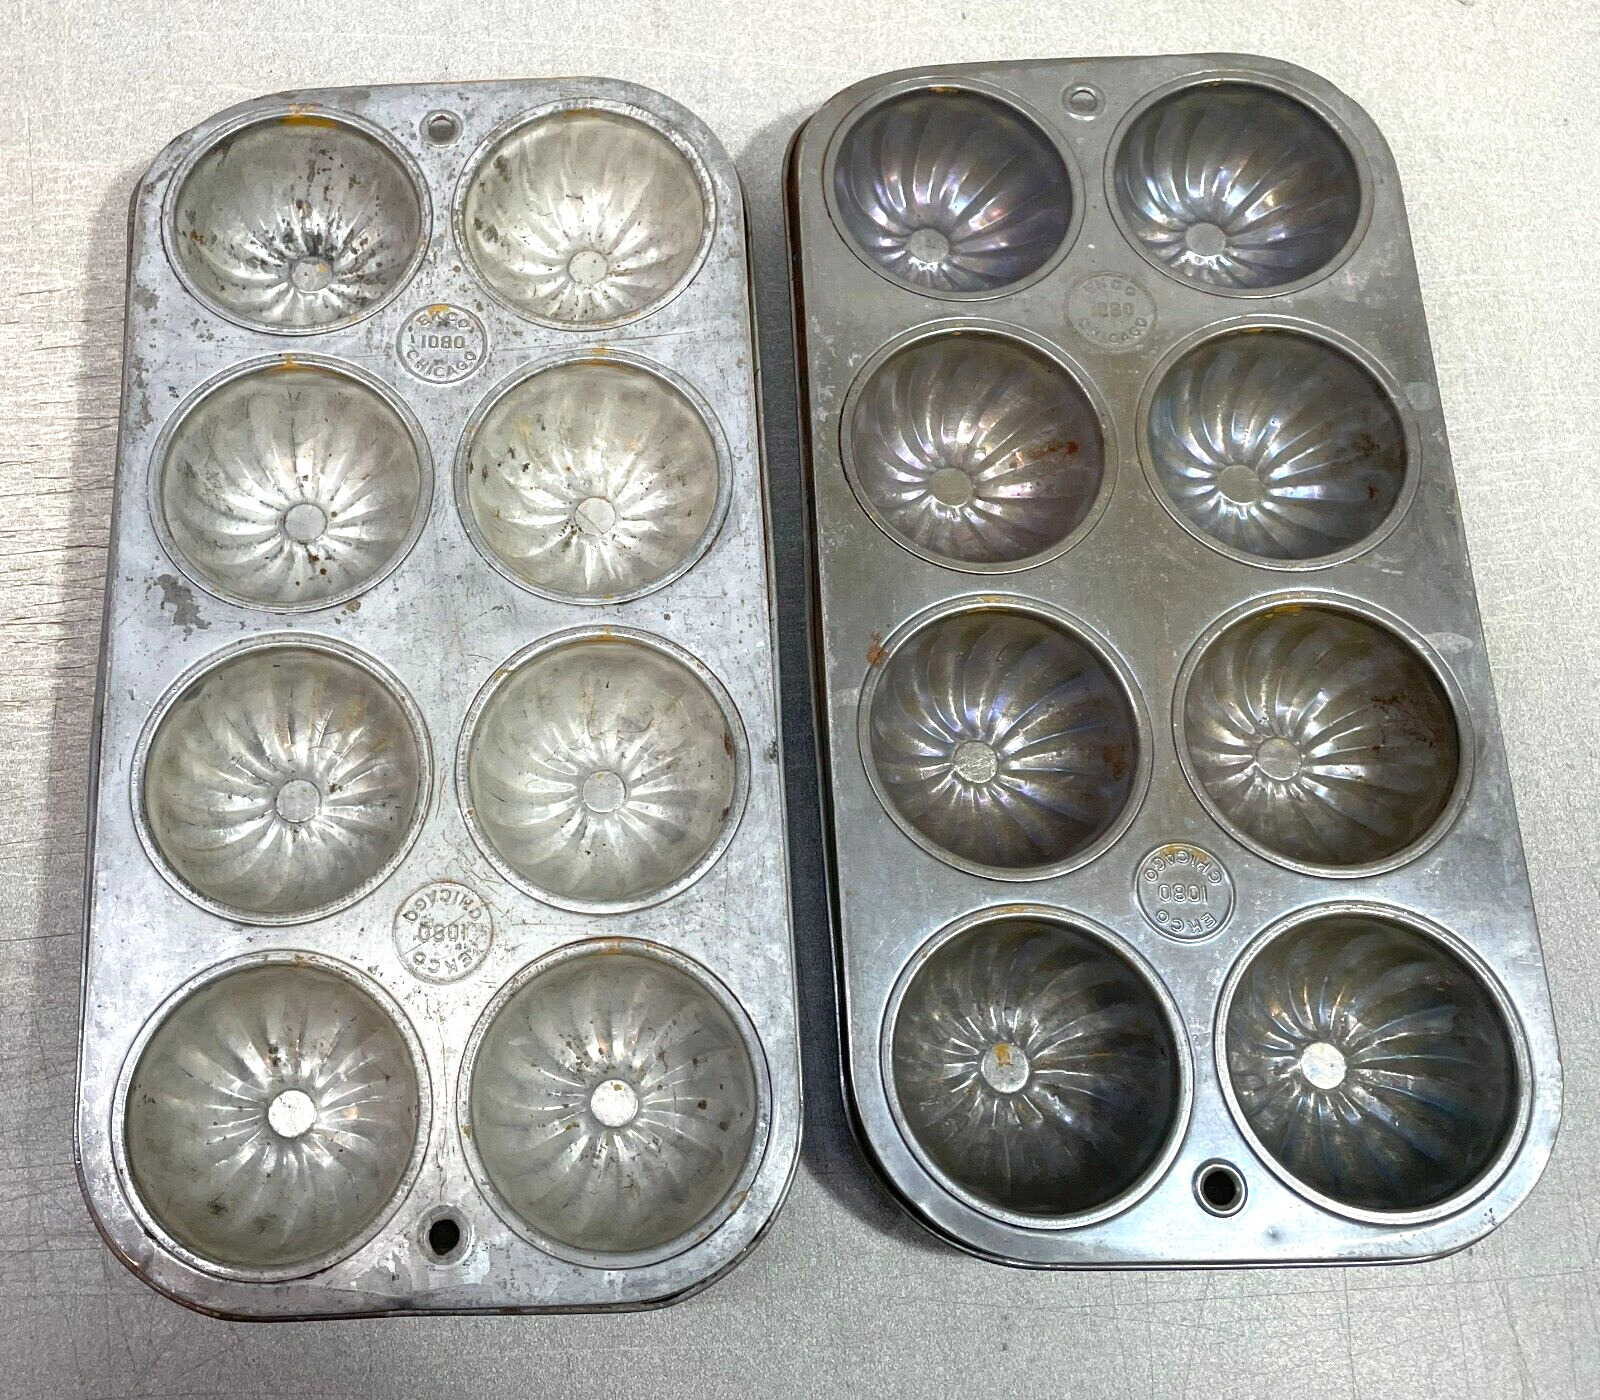 2 TWO VIntage Ekco Chicago 8 Hole Muffin Cupcake Pans